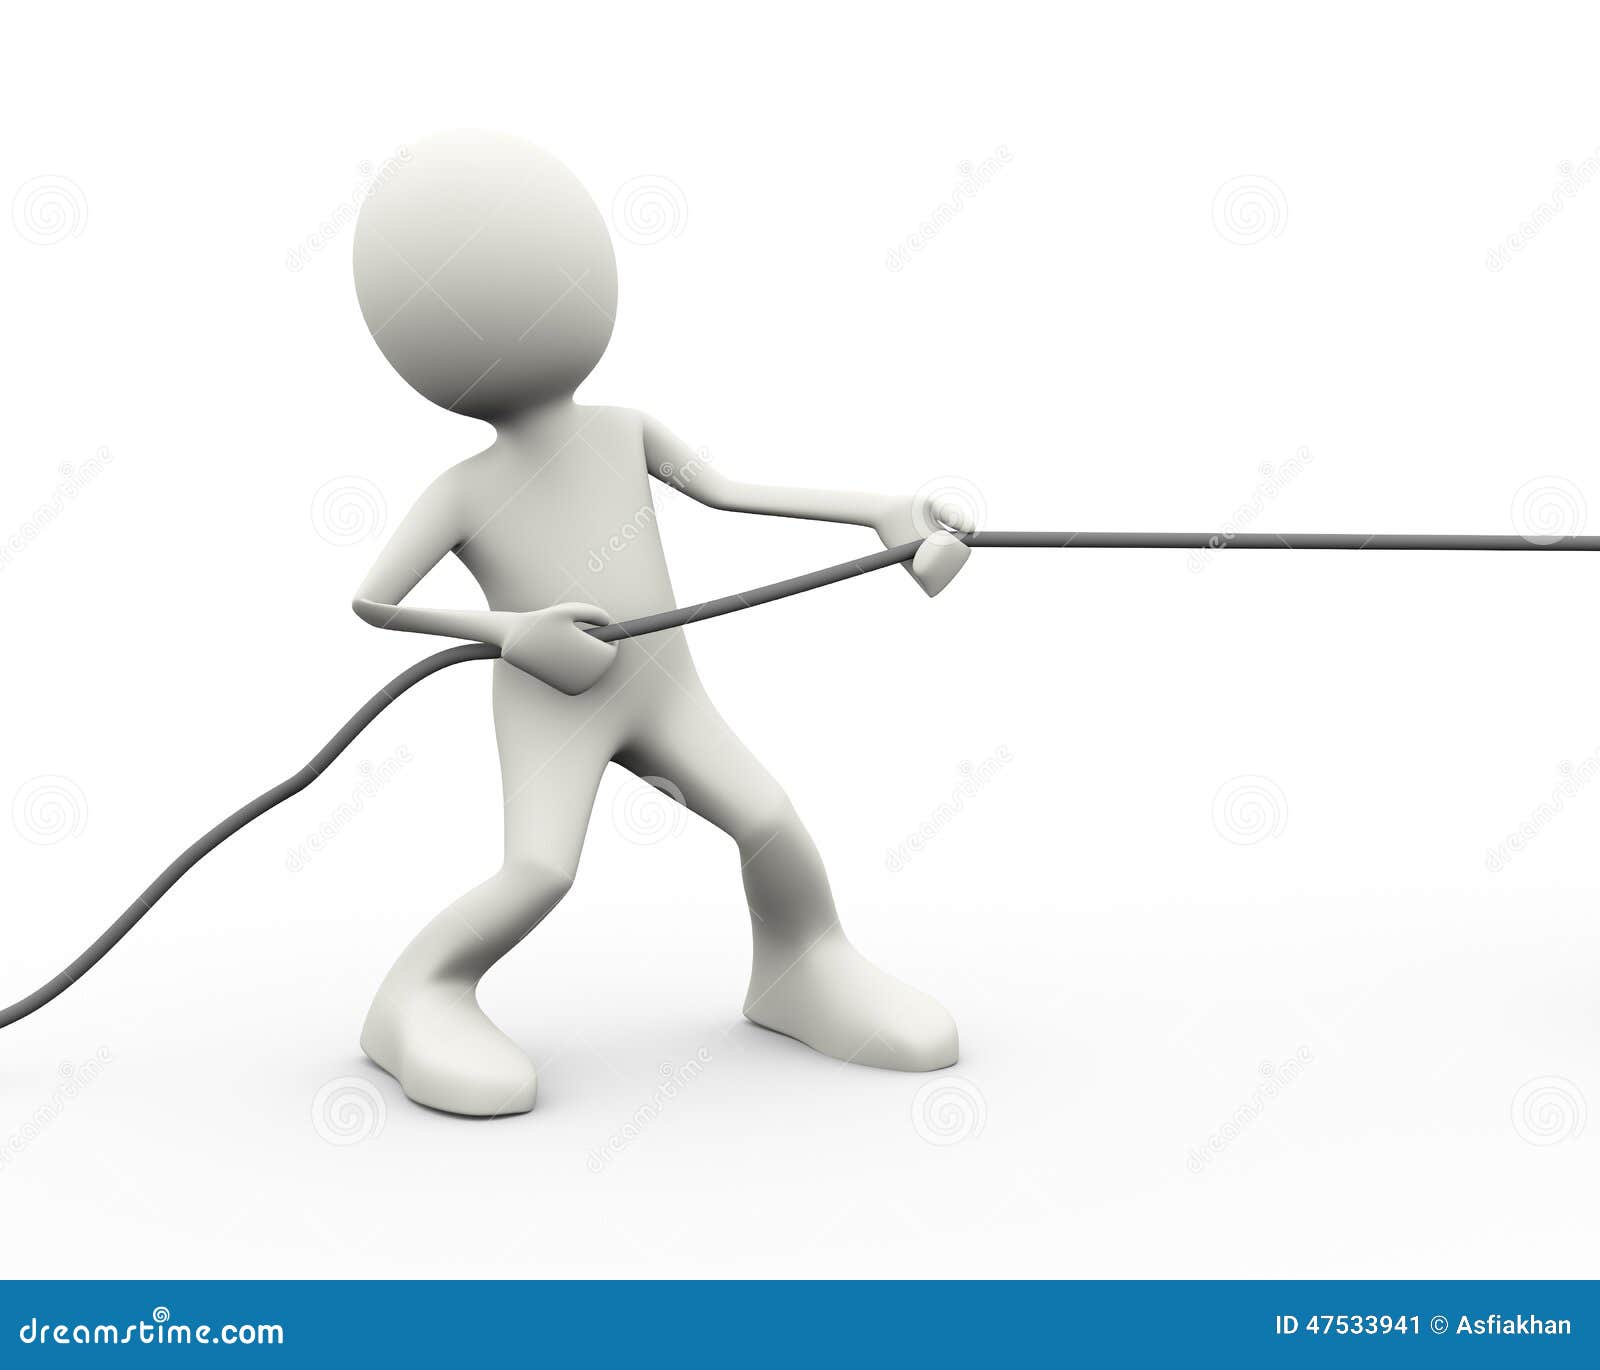 clipart tug of war rope - photo #33